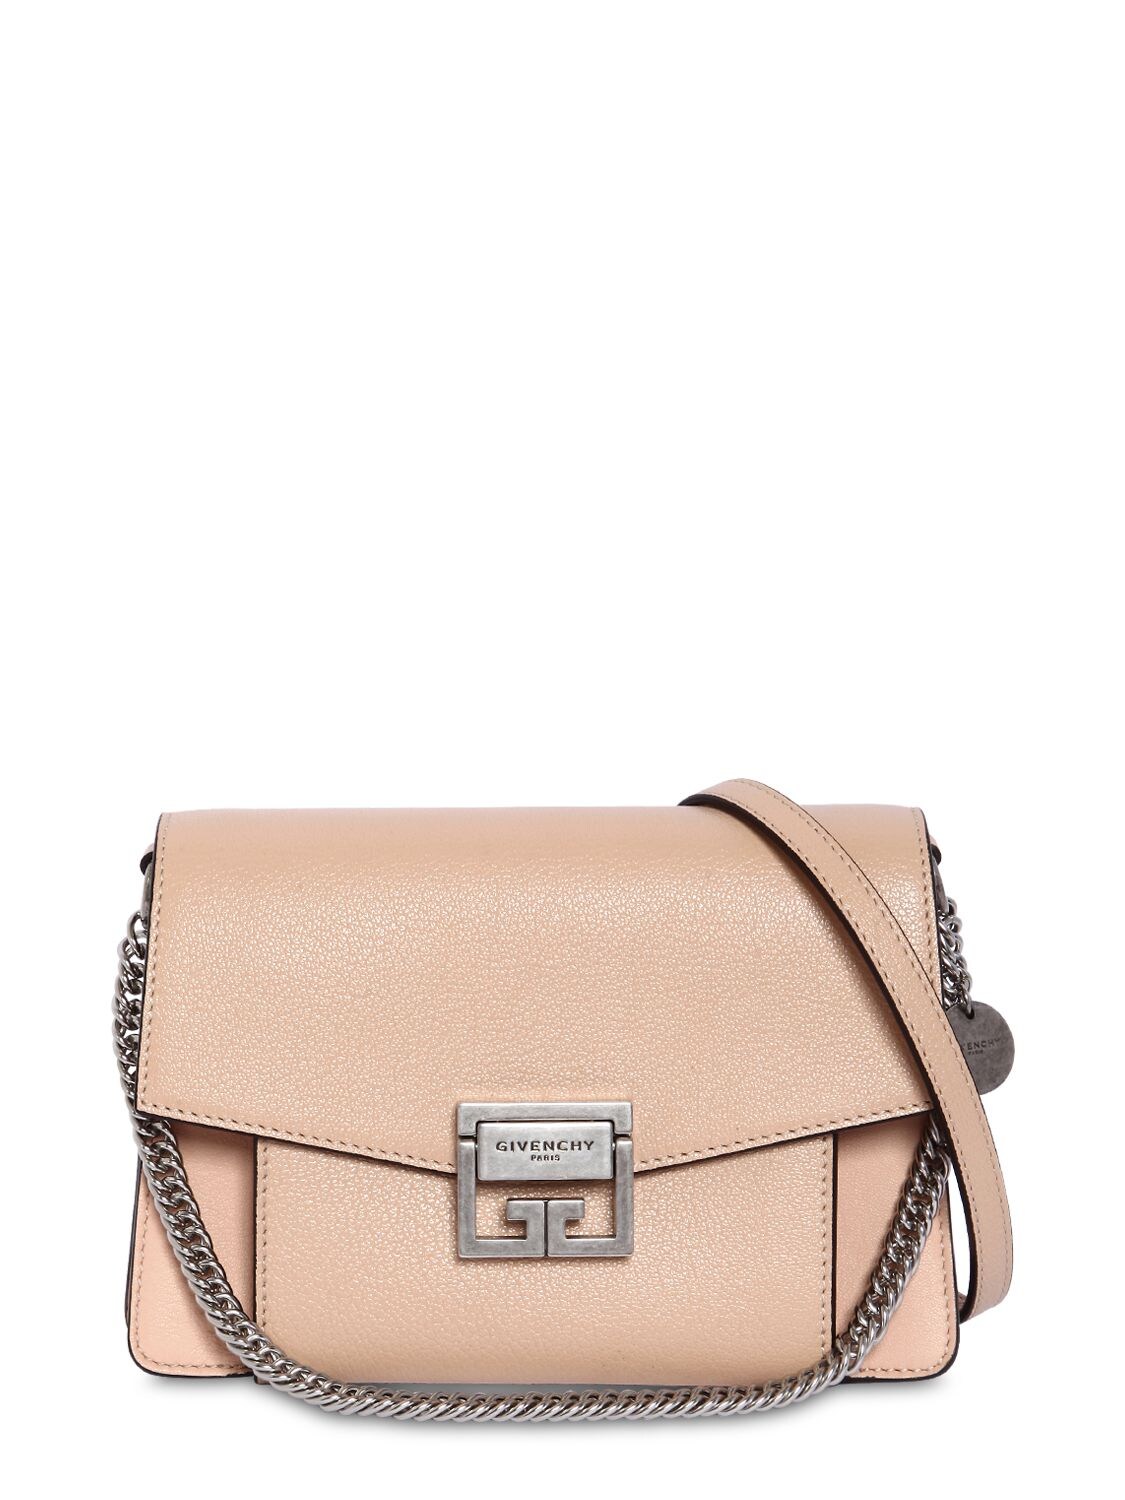 GIVENCHY SMALL GV3 GRAINED LEATHER SHOULDER BAG,68IA5P003-Mjcy0